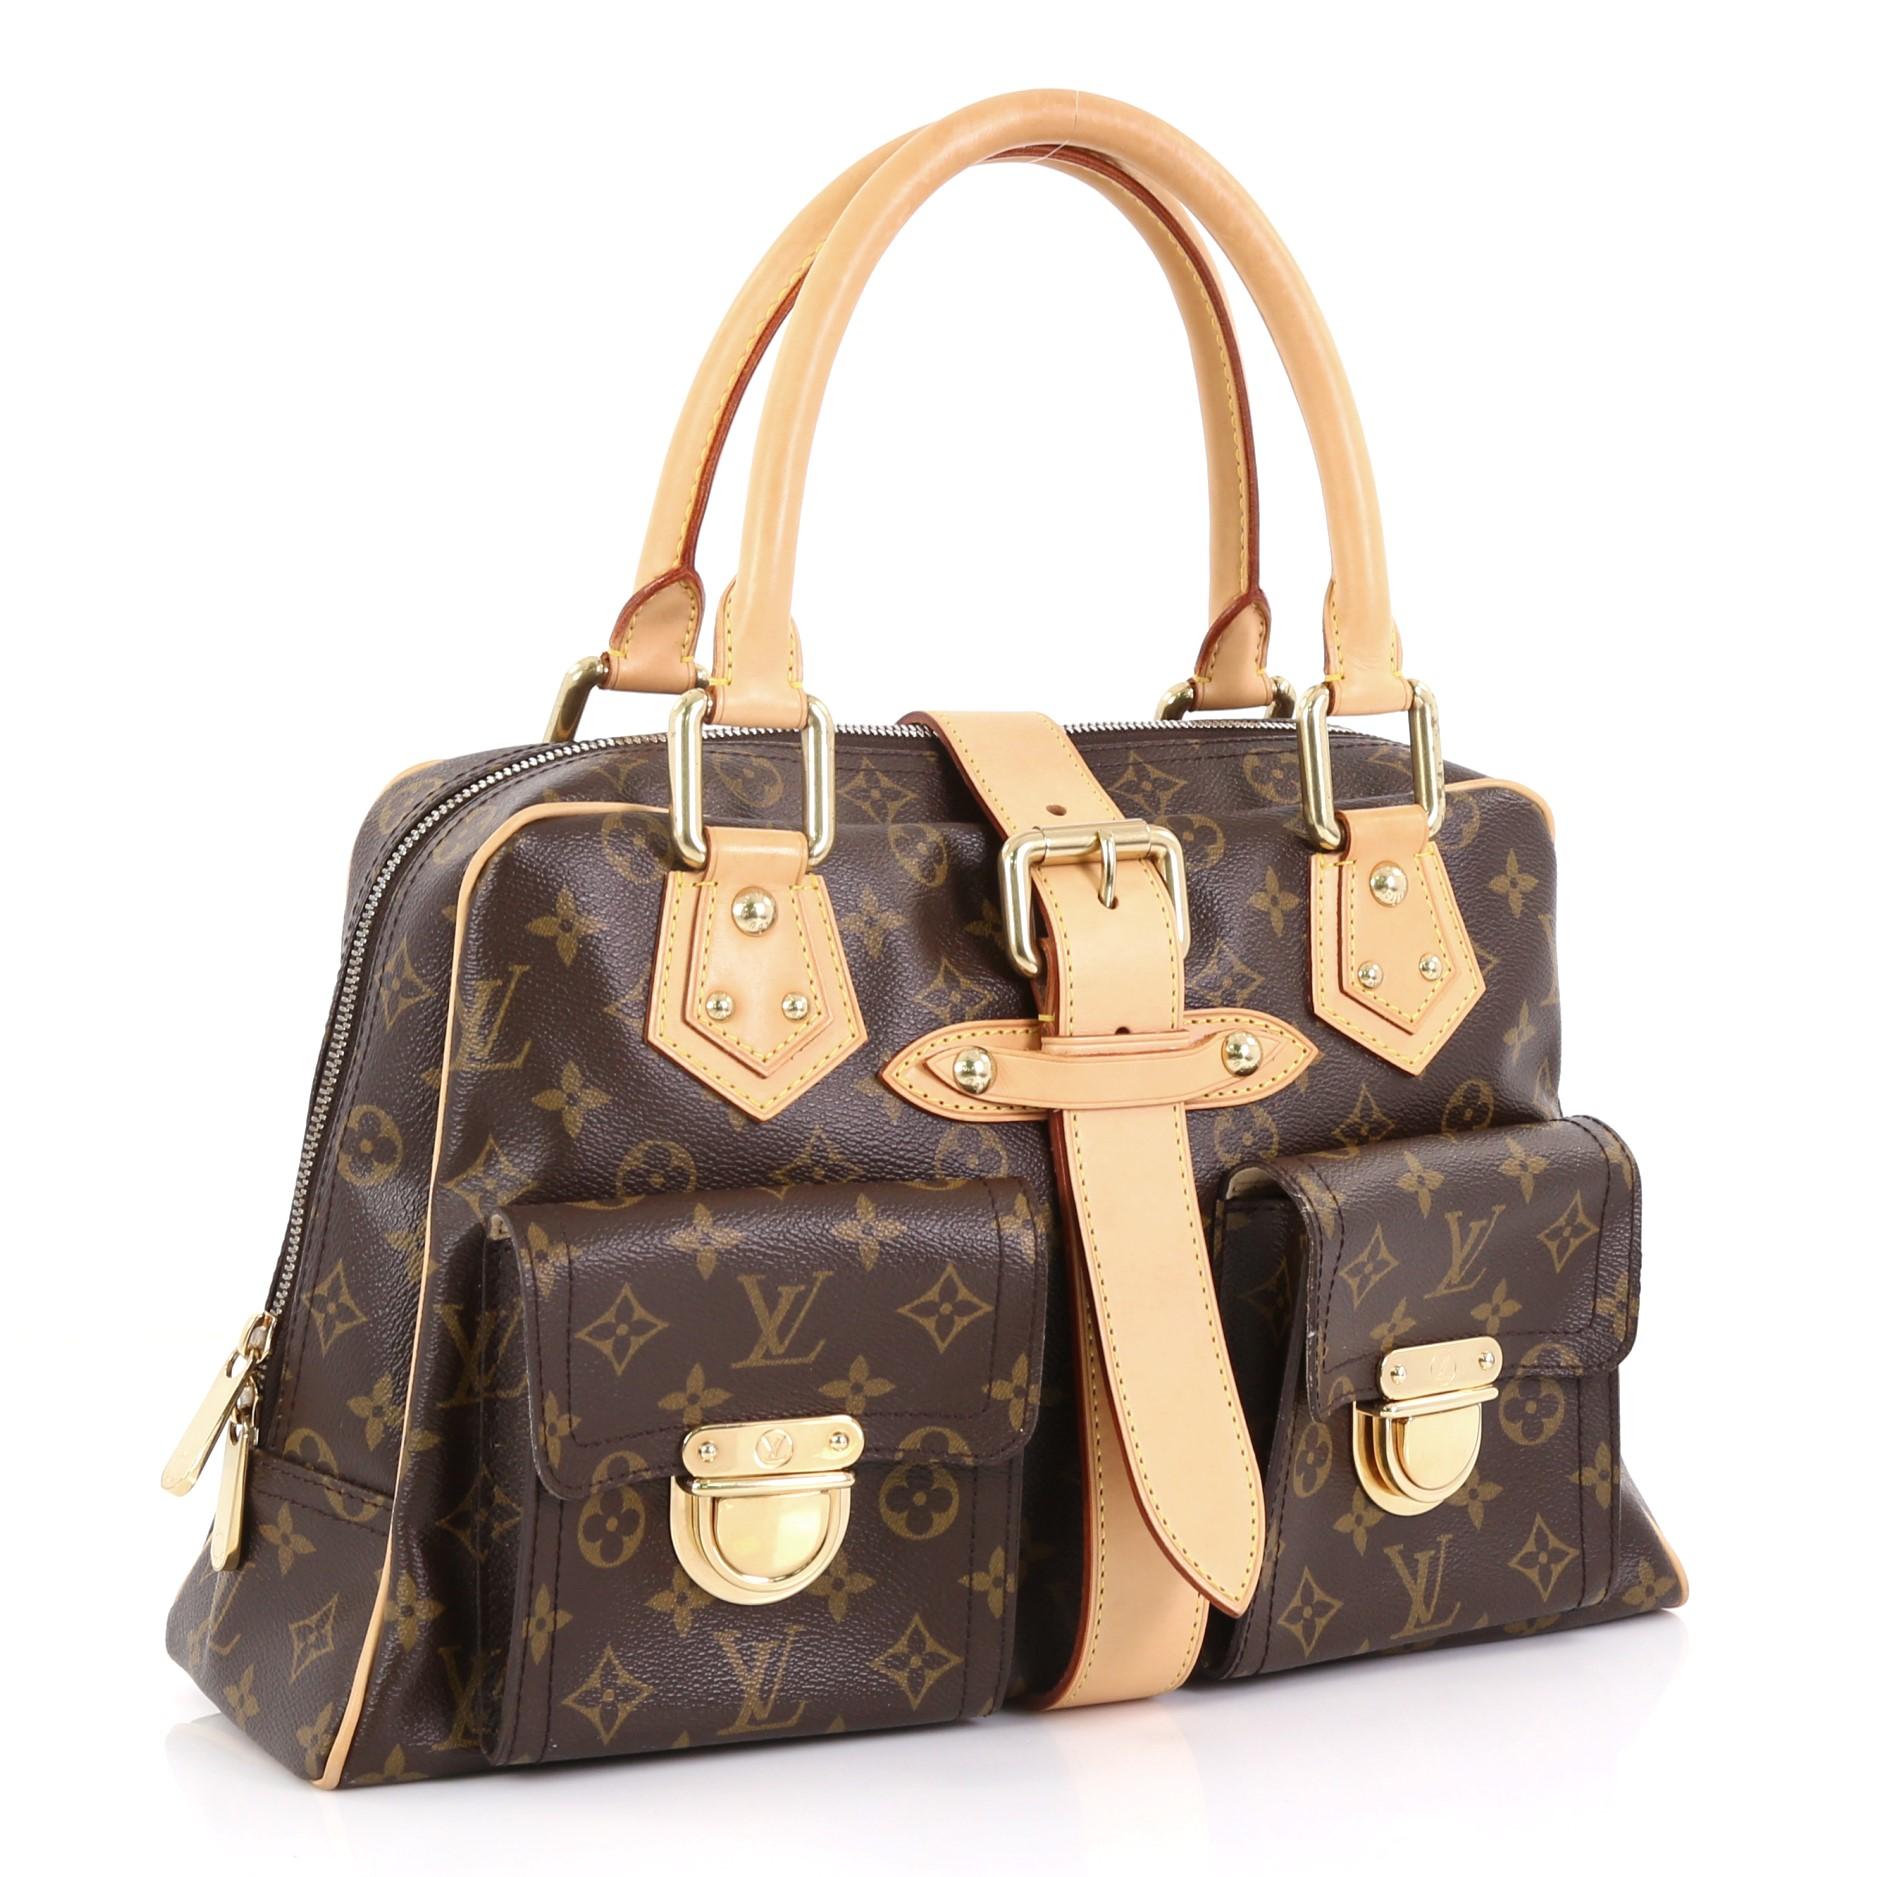 This Louis Vuitton Manhattan Handbag Monogram Canvas GM, crafted in brown monogram coated canvas, features dual rolled vachetta leather handles, front pockets with push-lock closure, and gold-tone hardware. Its top zip closure opens to a beige